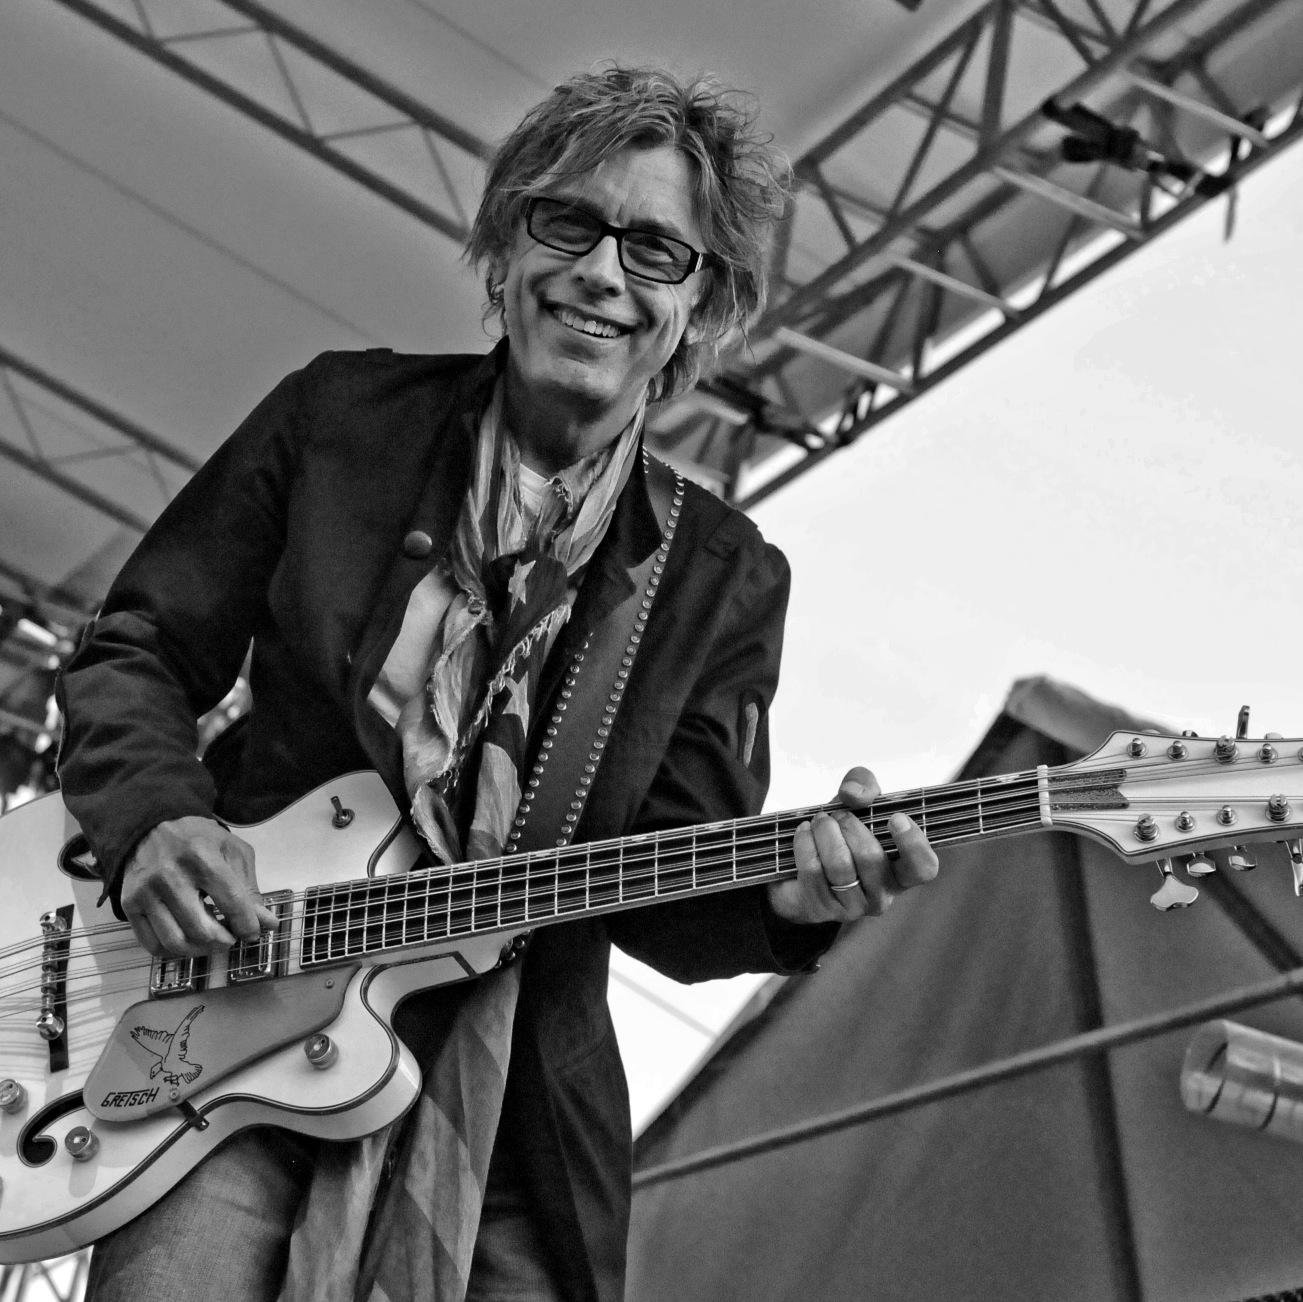 Official Tom Petersson twitter. Cheap Trick 12 string bassist.